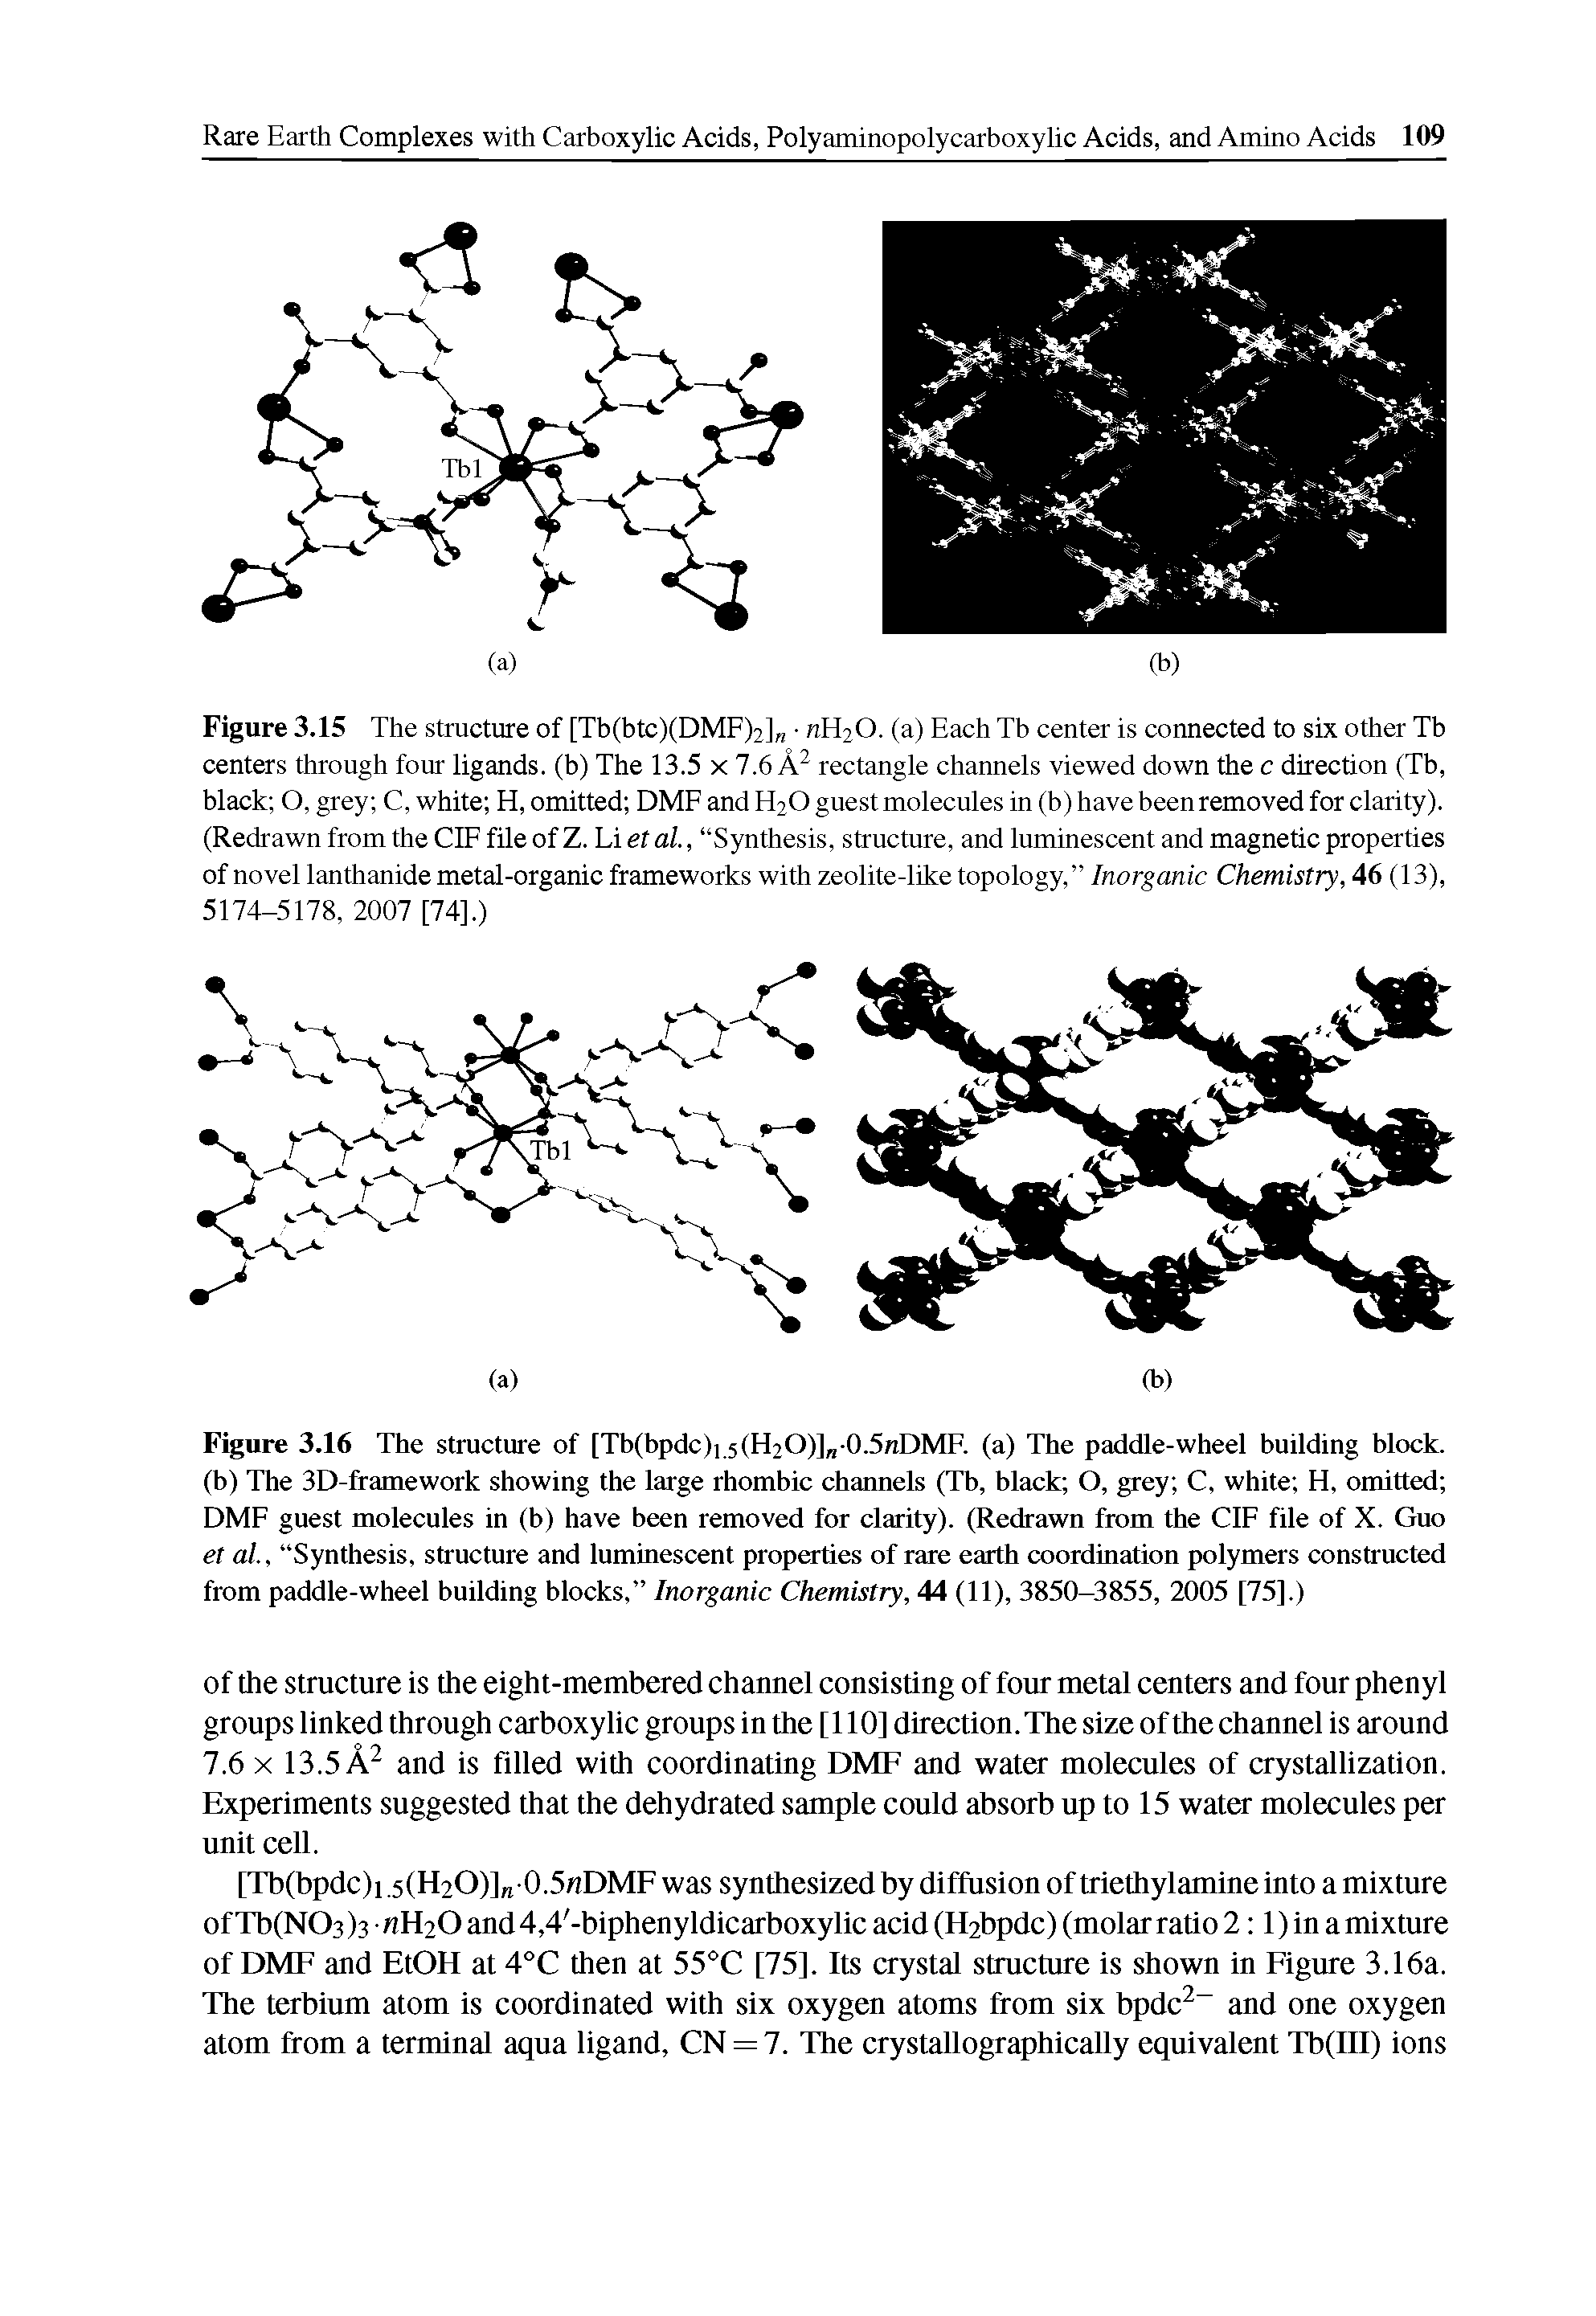 Figure 3.15 The structure of [Tb(btc)(DMF)2] nH20. (a) Each Tb center is connected to six other Tb centers through four ligands, (b) The 13.5 x 7.6 rectangle channels viewed down the c direction (Tb, black O, grey C, white H, omitted DMF and H2O guest molecules in (b) have been removed for clarity). (Redrawn from the CIF file of Z. Li et al., Synthesis, structure, and luminescent and magnetic properties of novel lanthanide metal-organic frameworks with zeolite-like topology, Inorganic Chemistry, 46 (13), 5174-5178, 2007 [74].)...